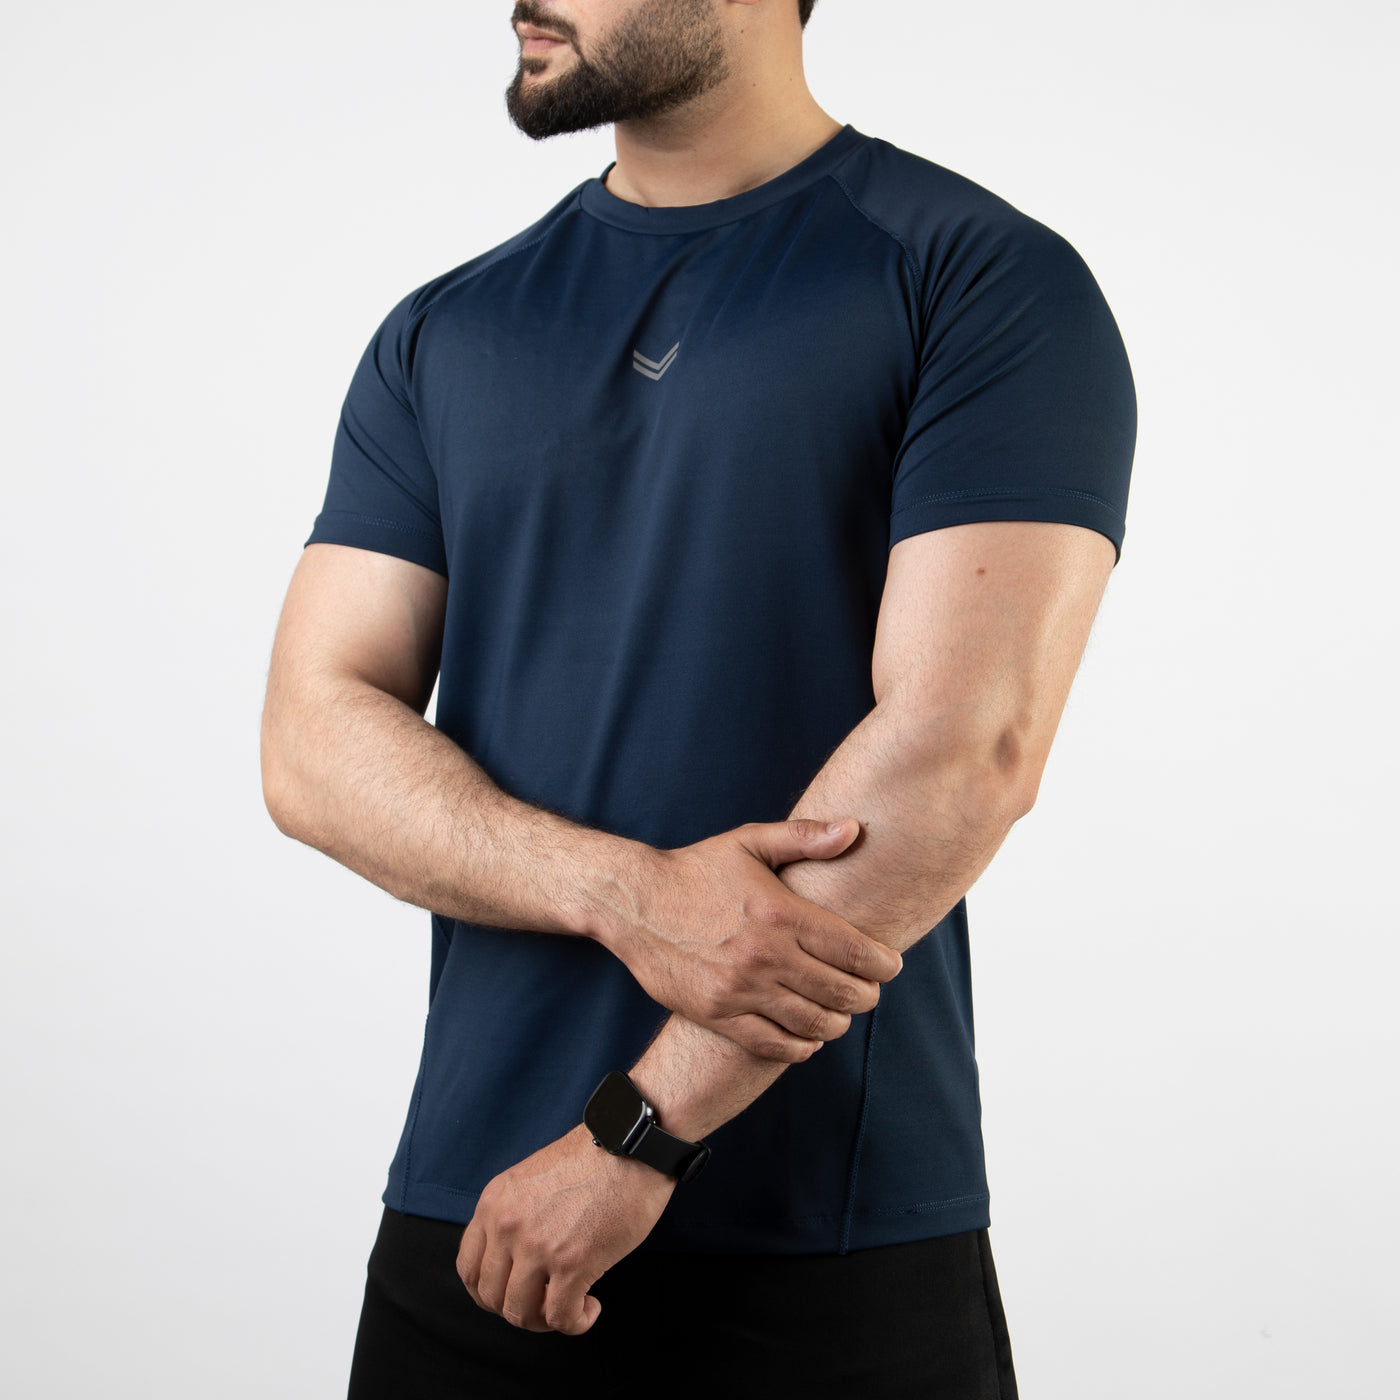 Navy 4-Way Stretch Training T-Shirt with Reflective Logo